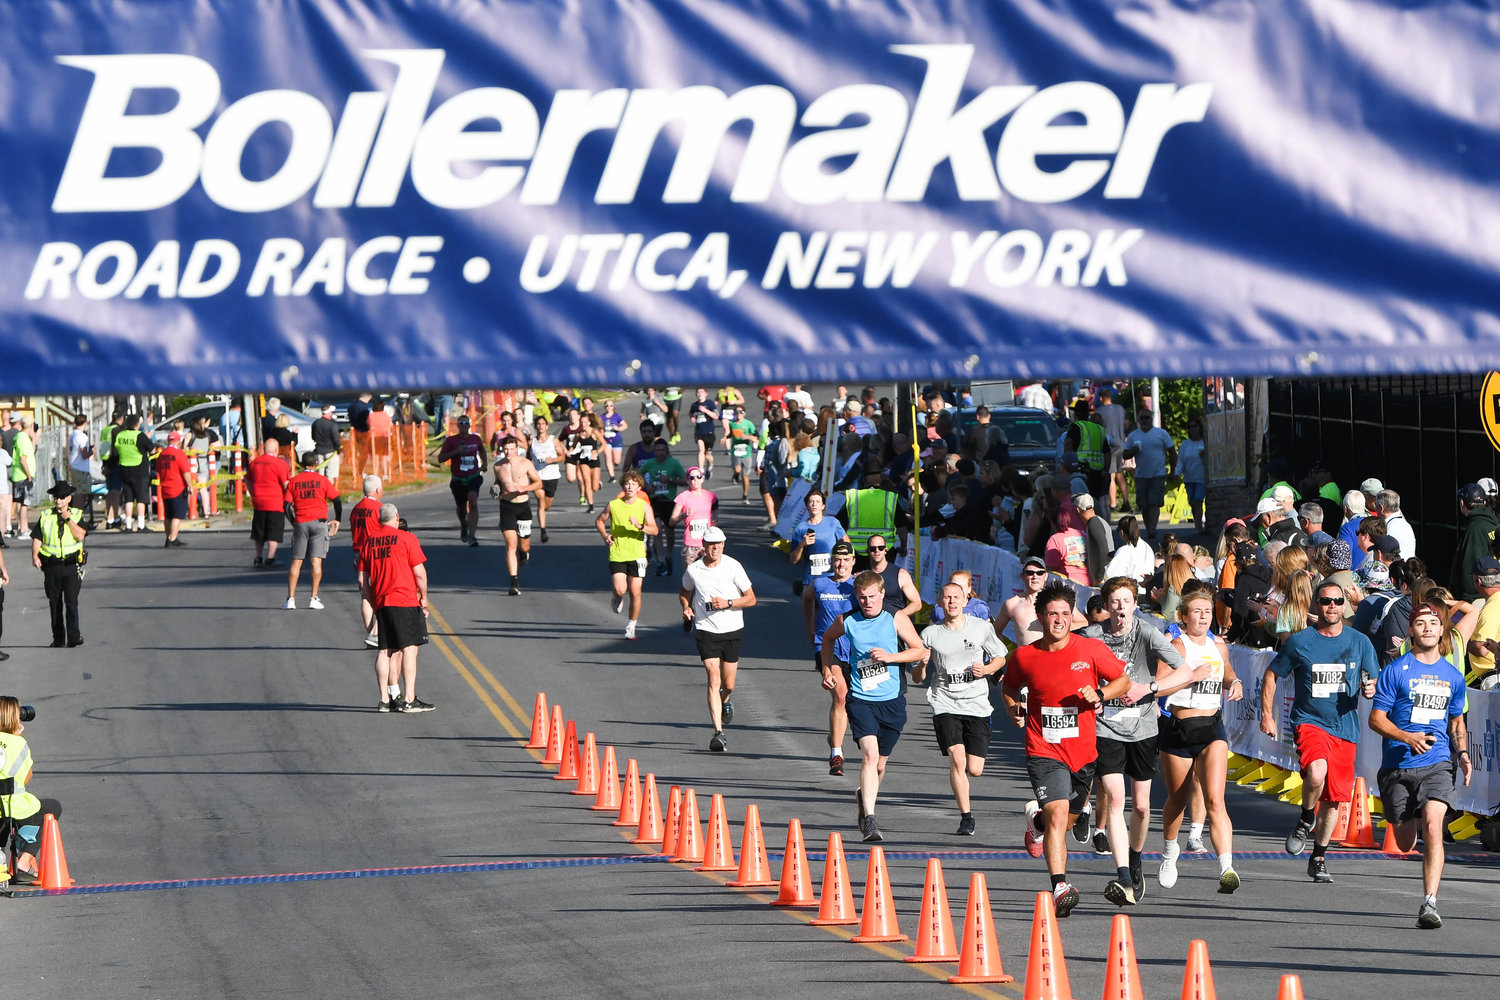 Runners make their way to the finish line during the 5K at the 45th Boilermaker Road Race on Sunday in Utica.